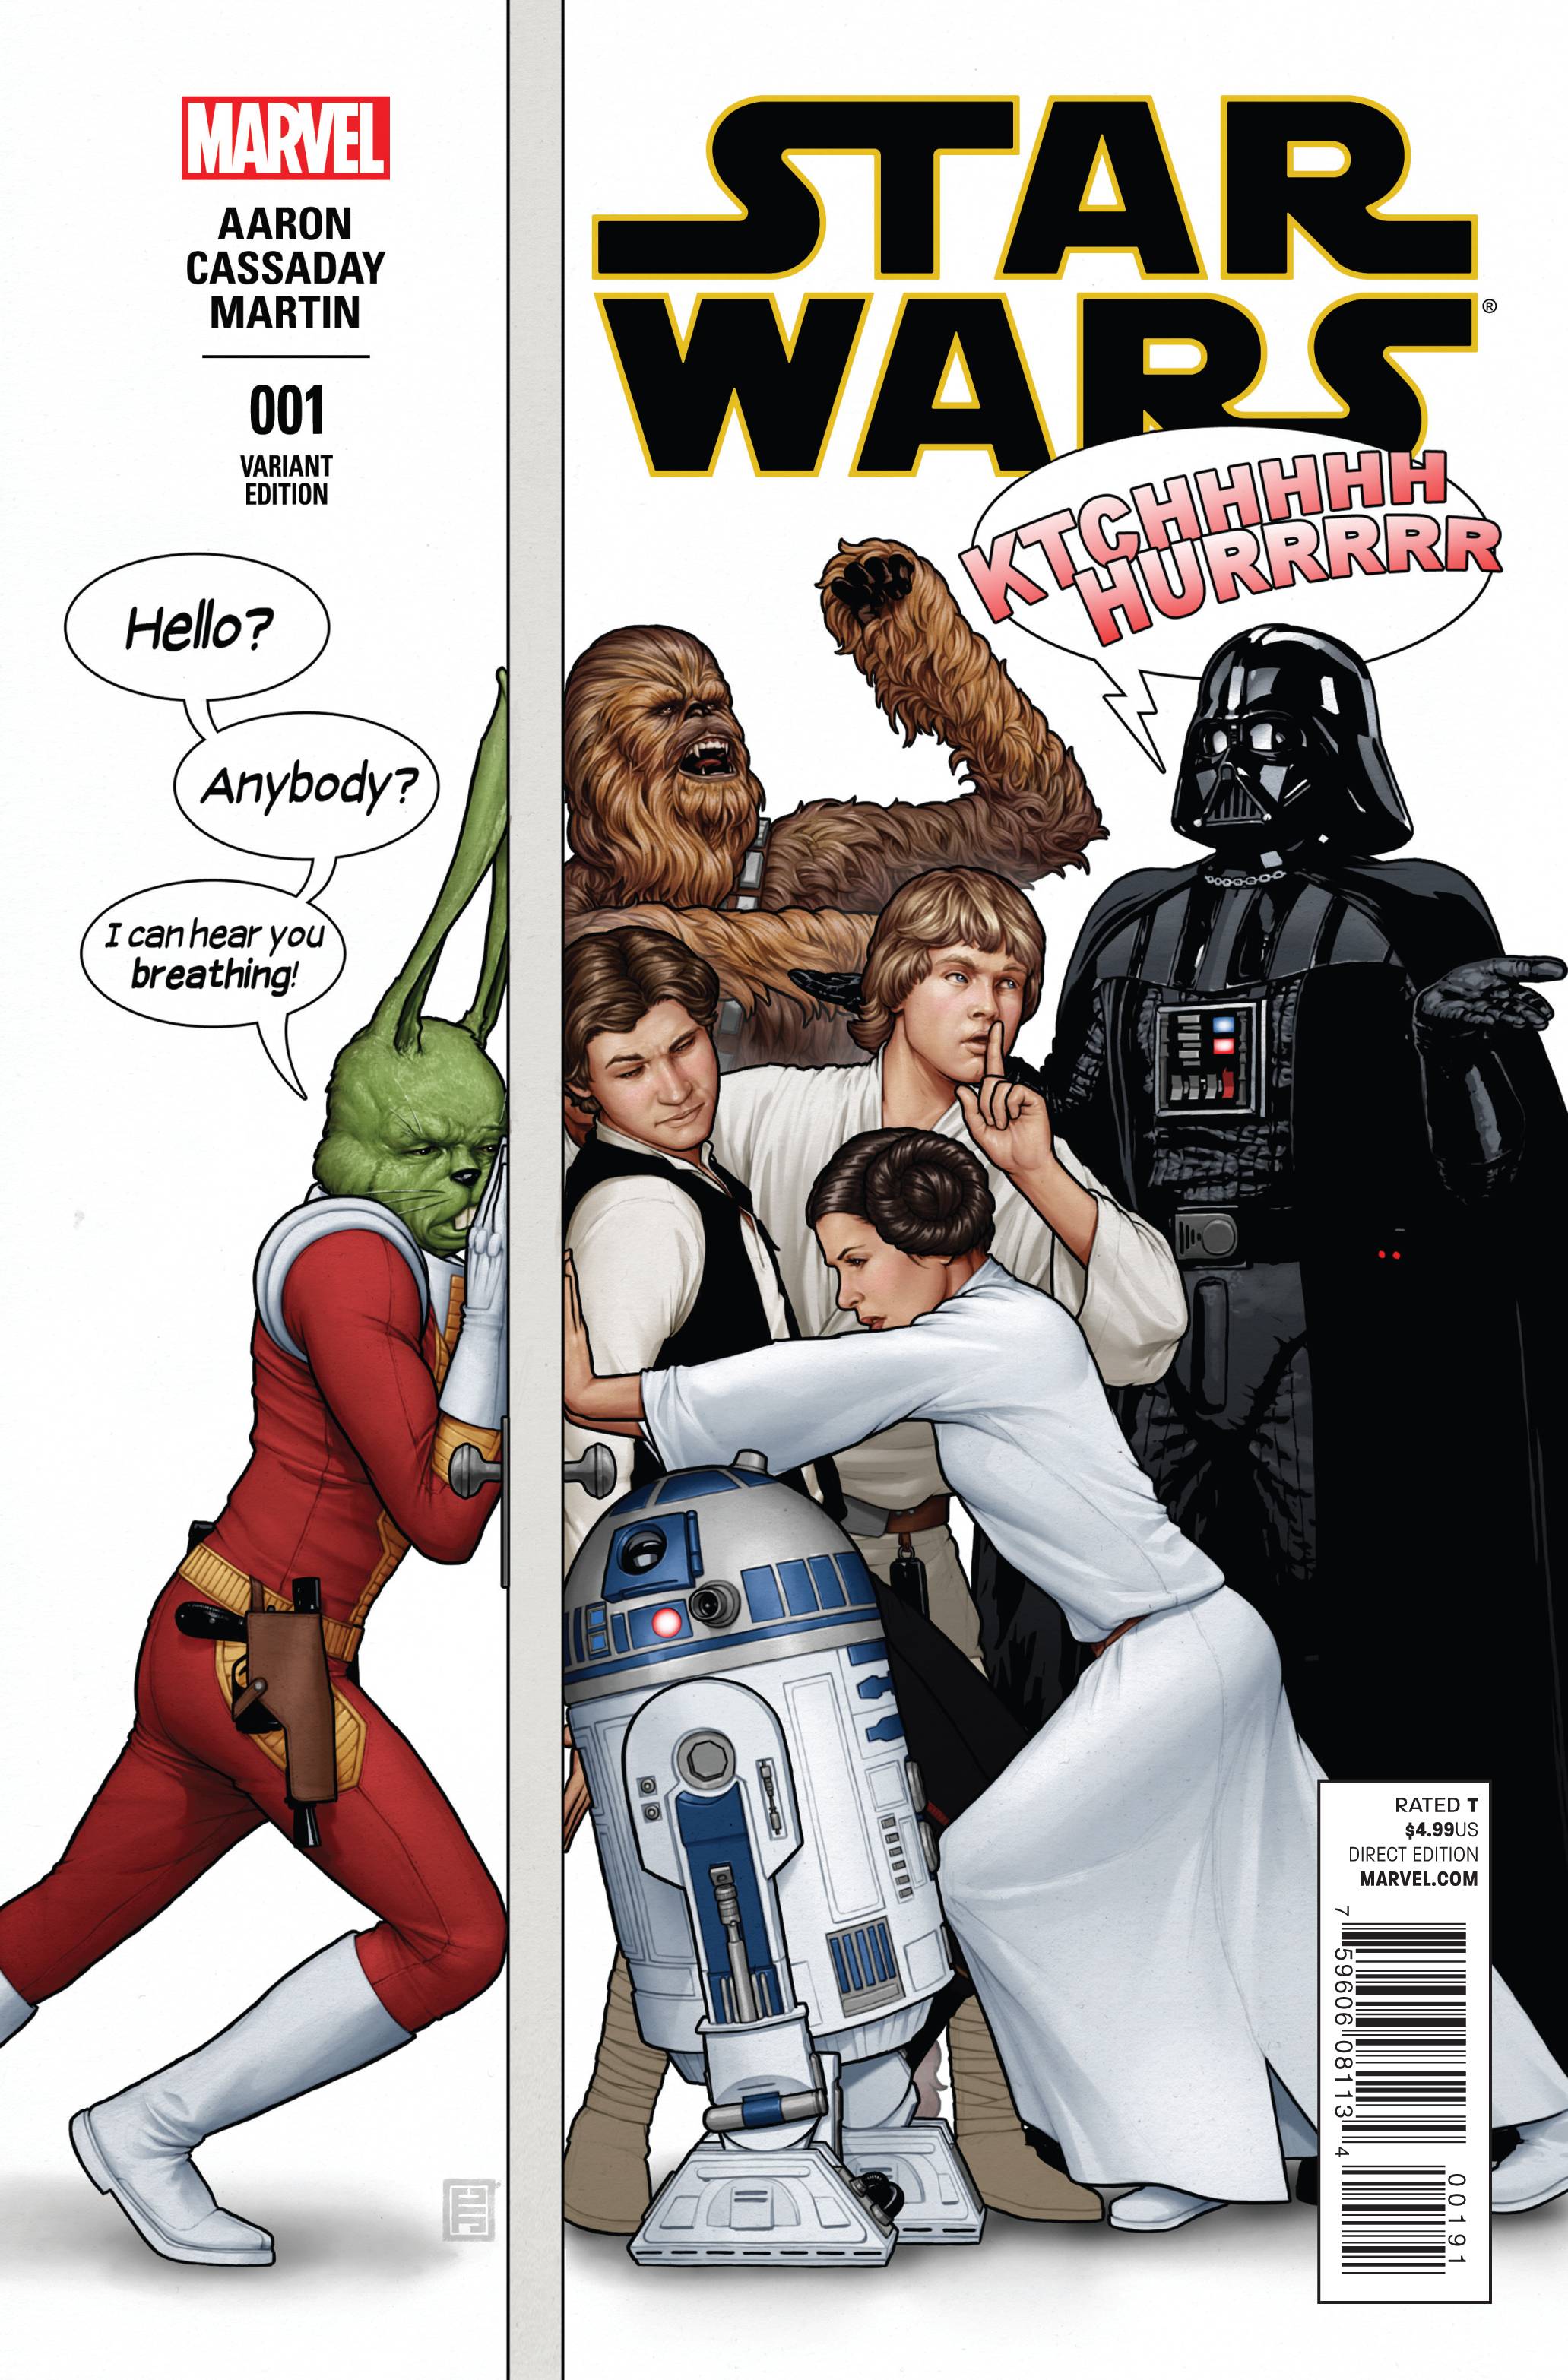 Star Wars #1 Christopher Humorous Party Variant (2015)